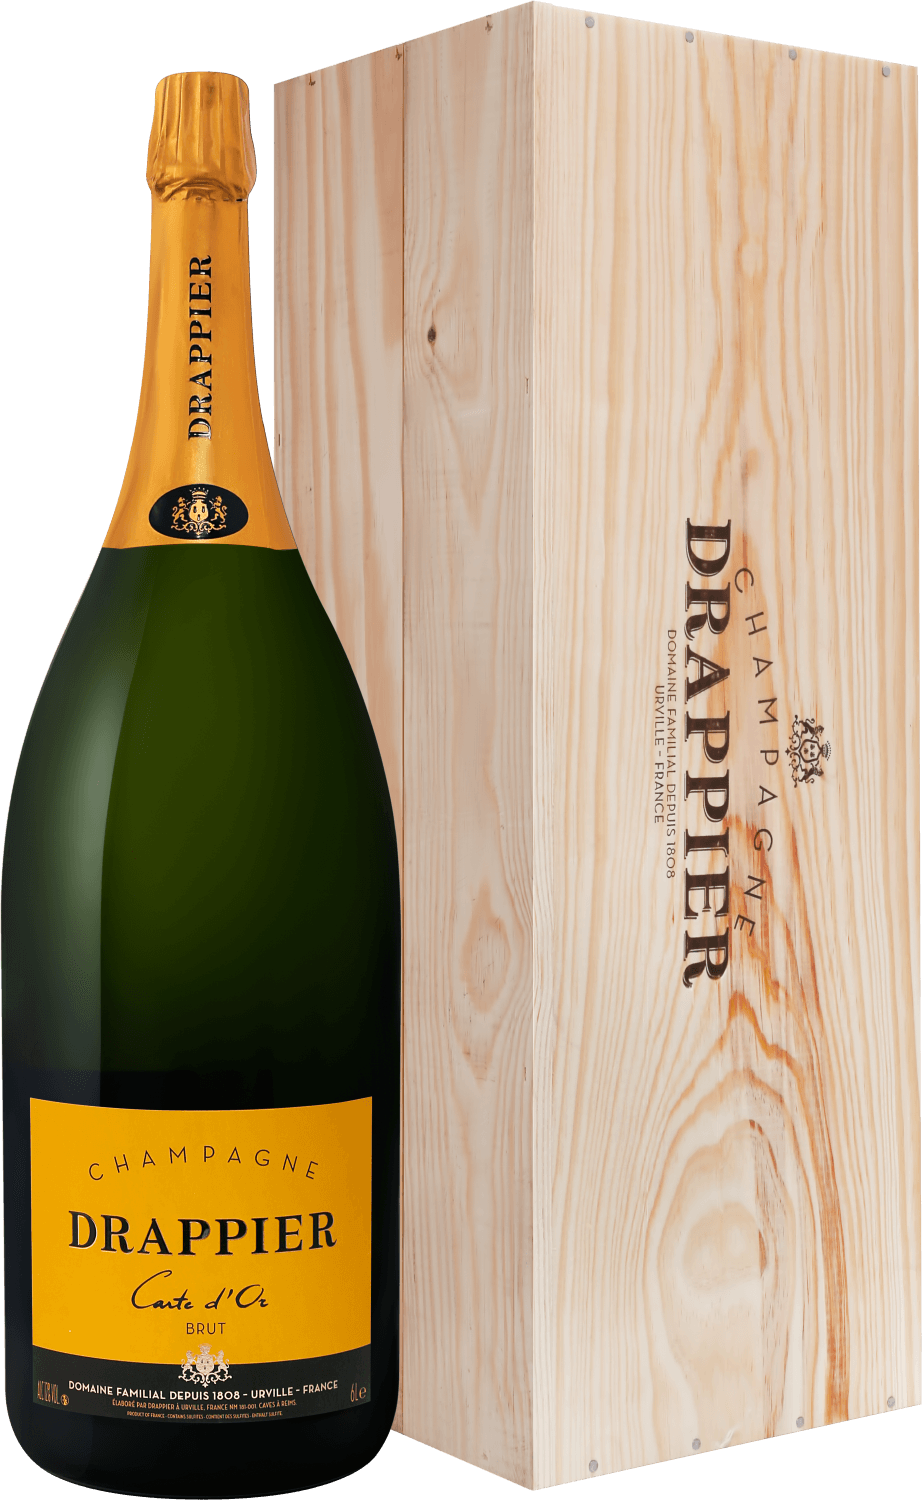 Drappier Carte d’Or Brut Champagne AOP in gift box drappier carte d or gift box